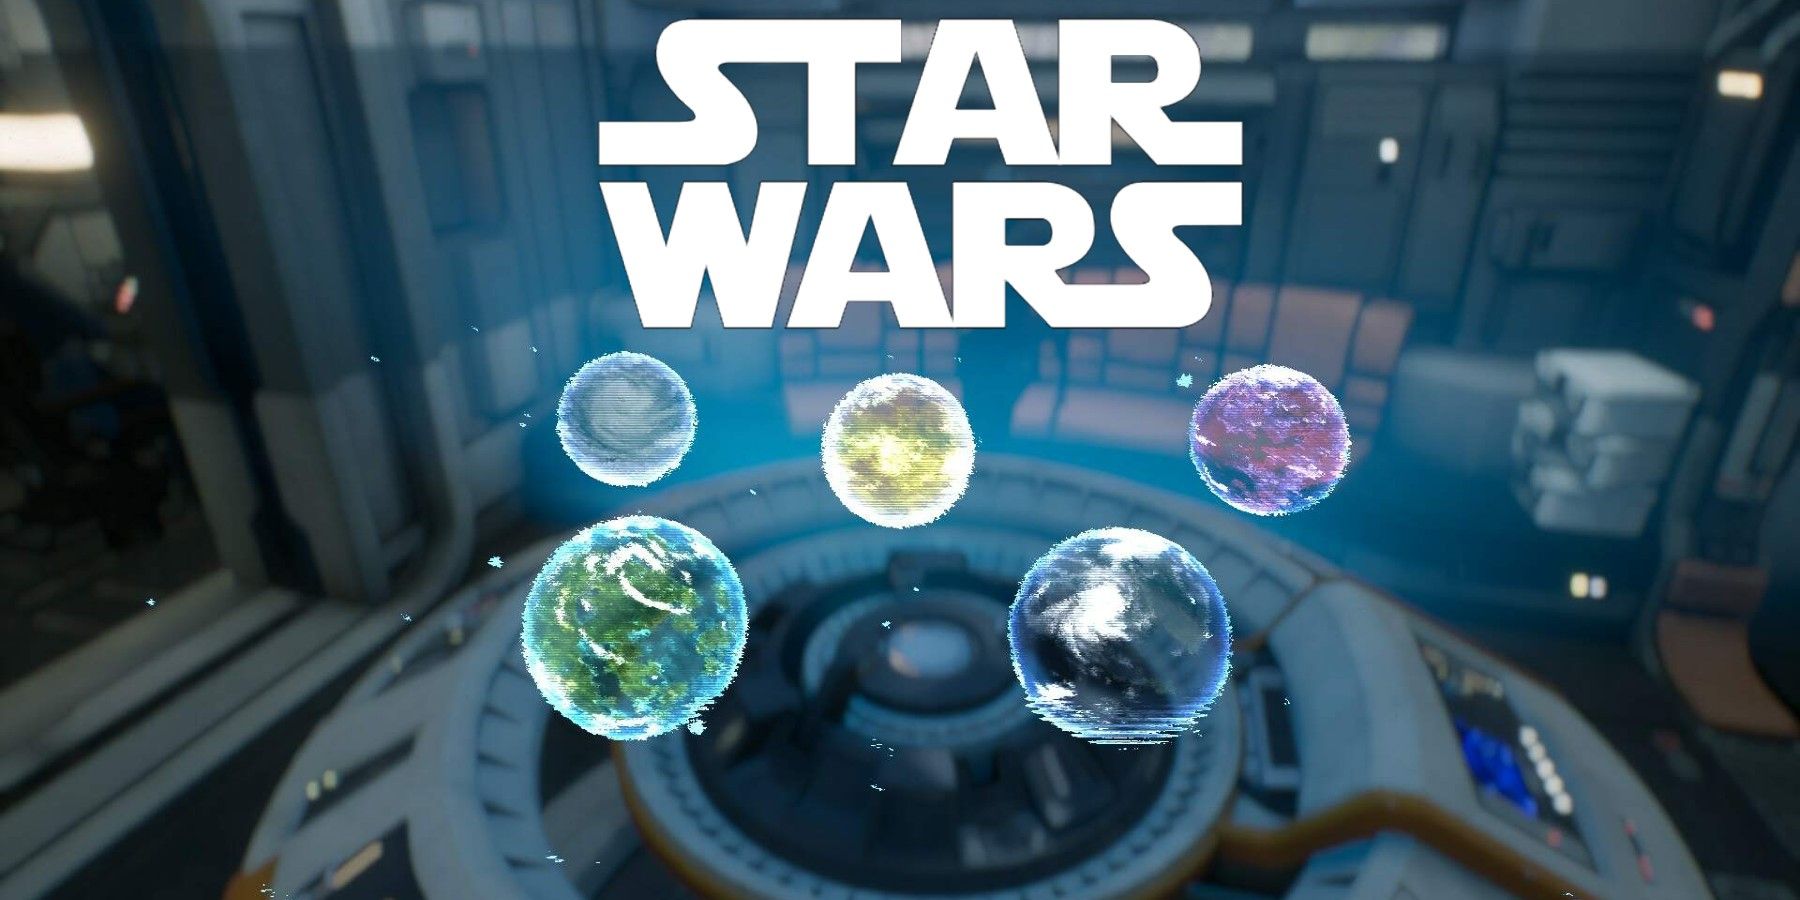 star-wars-planets-games